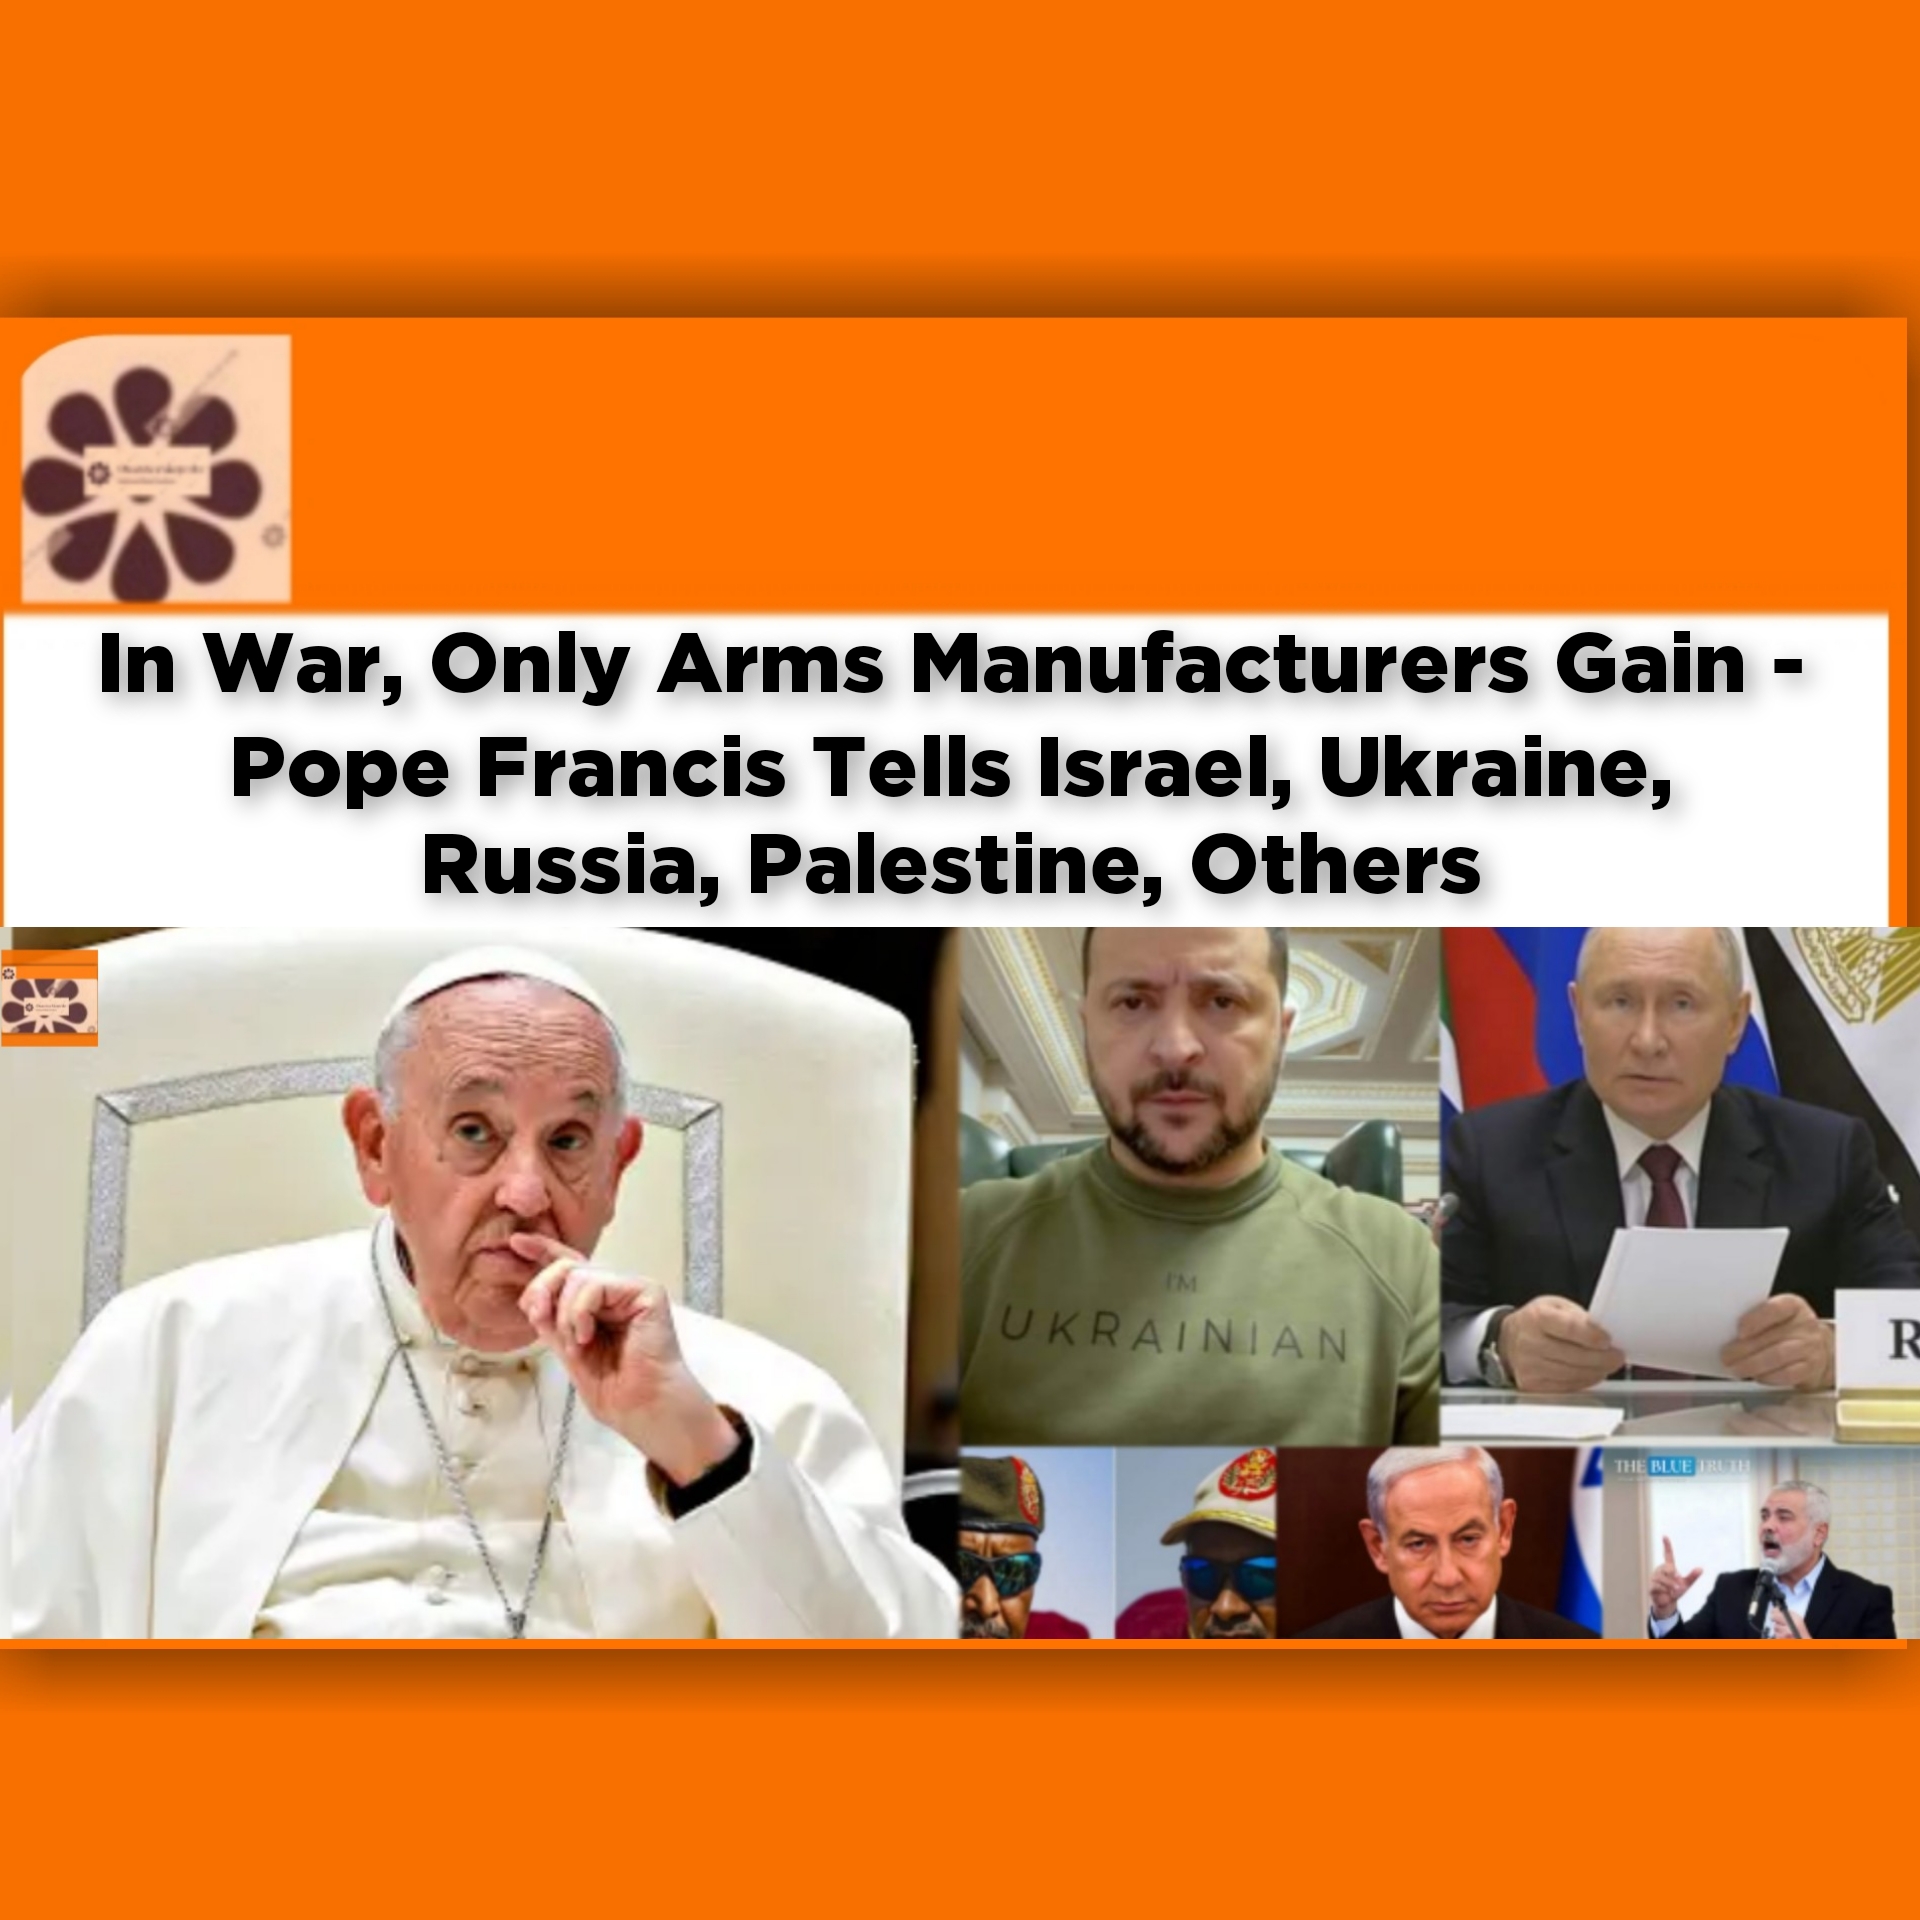 In War, Only Arms Manufacturers Gain - Pope Francis Tells Israel, Ukraine, Russia, Palestine, Others ~ OsazuwaAkonedo #Dss